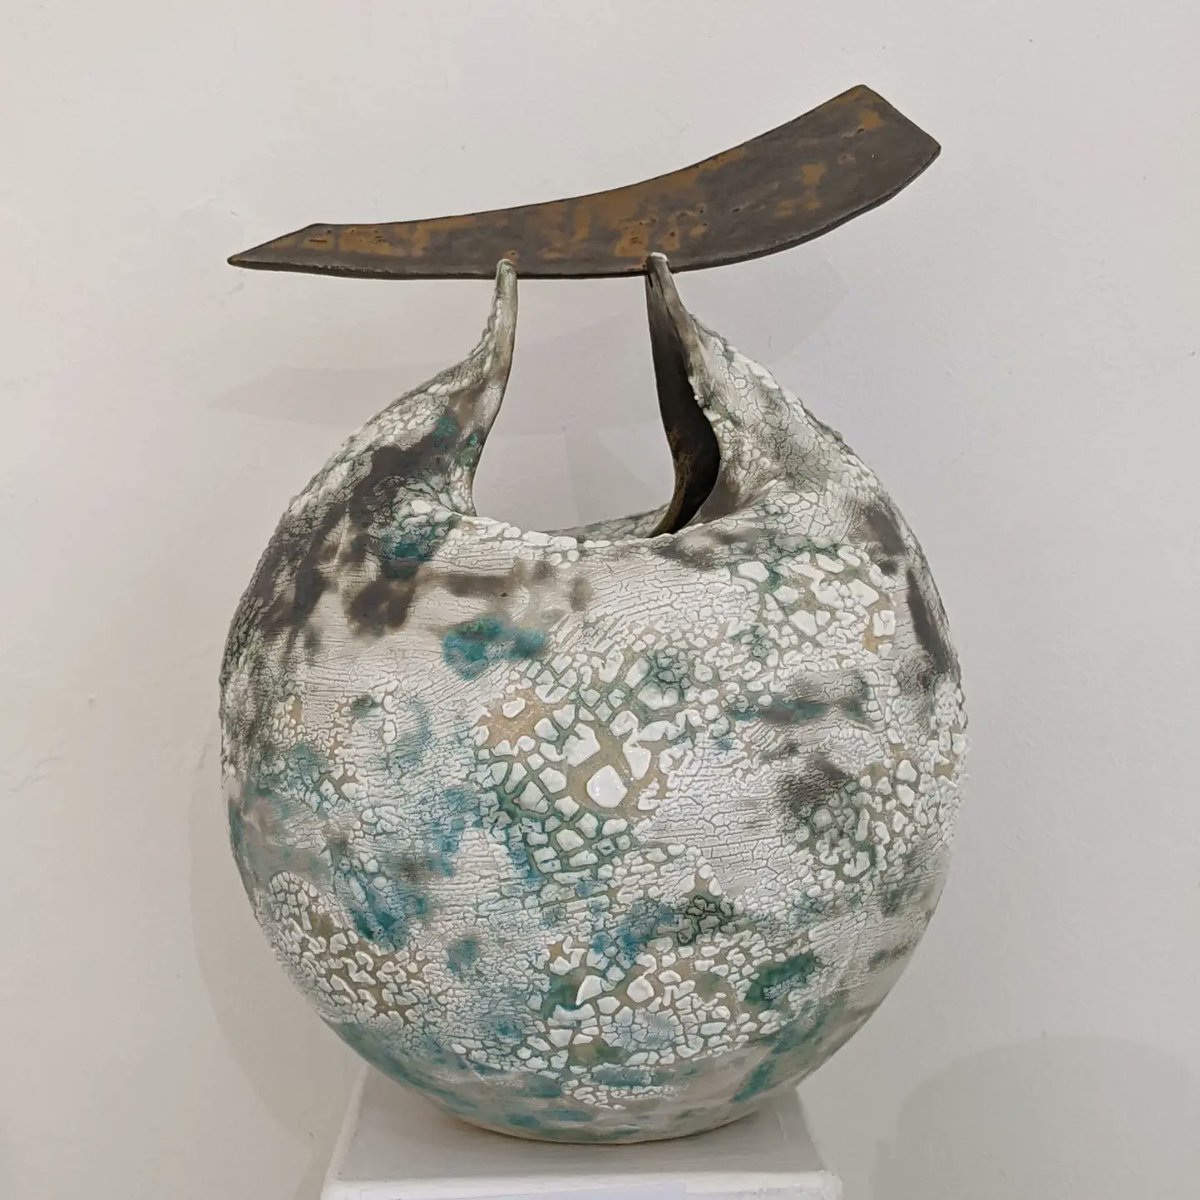 Hand built large stoneware pot with crawl glaze, or often called lichen glaze. Enjoying pushing the boundaries with a glaze. 
I have been away from Raku for a while perfecting this style of new work that will be appearing in an exhibition from 27th September. @HHArtsandYoga